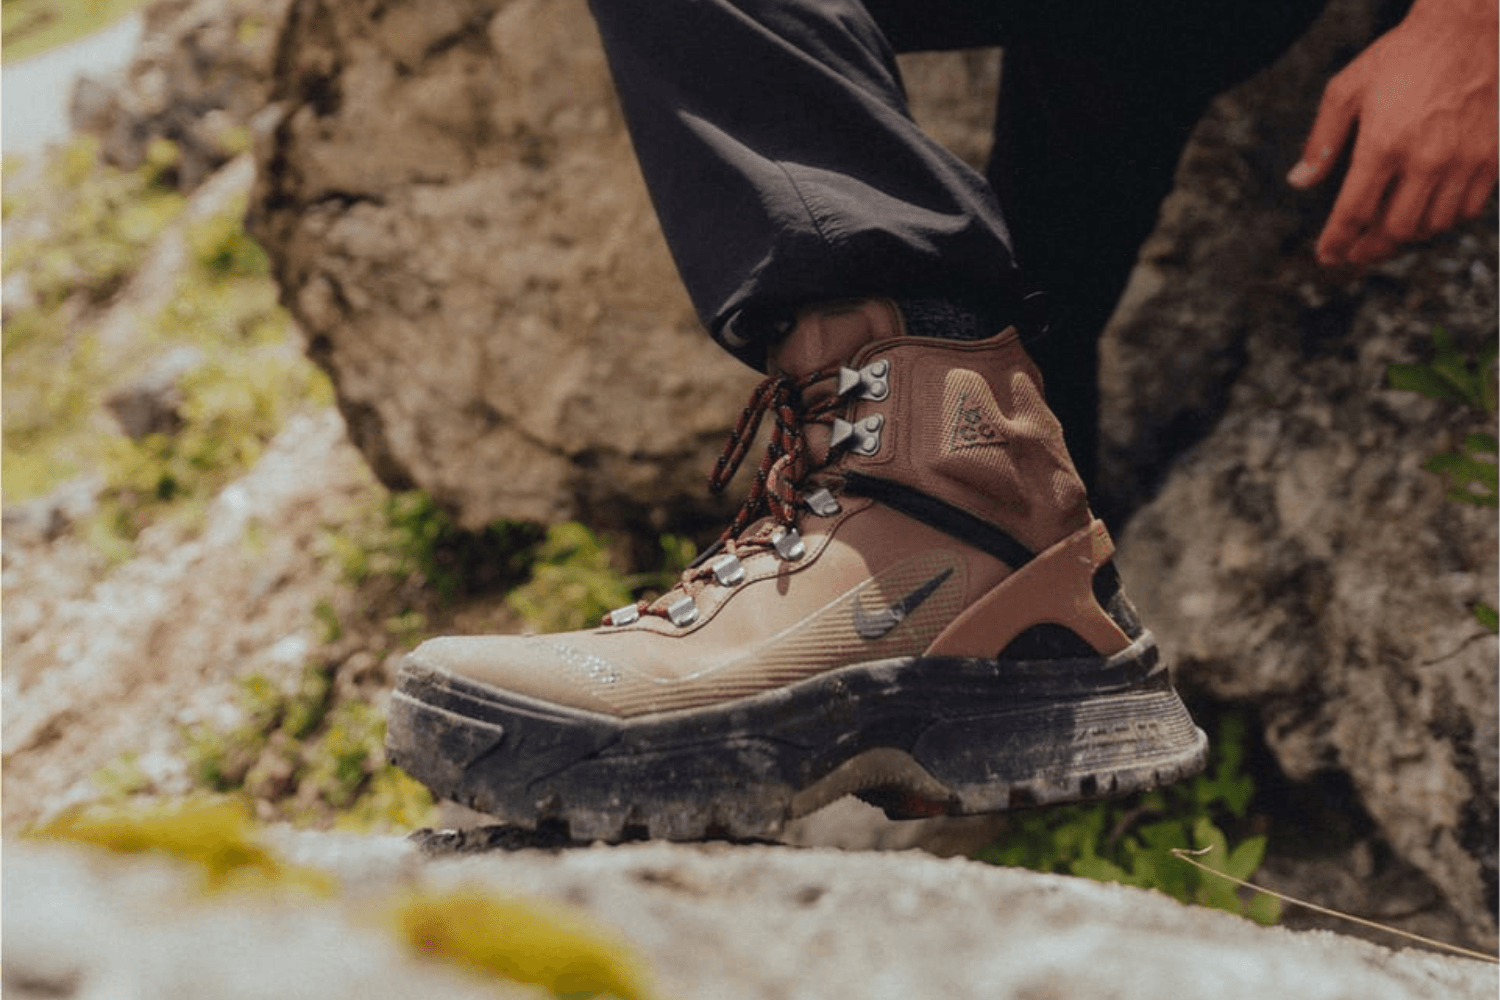 A top 10 popular and practical outdoor sneakers